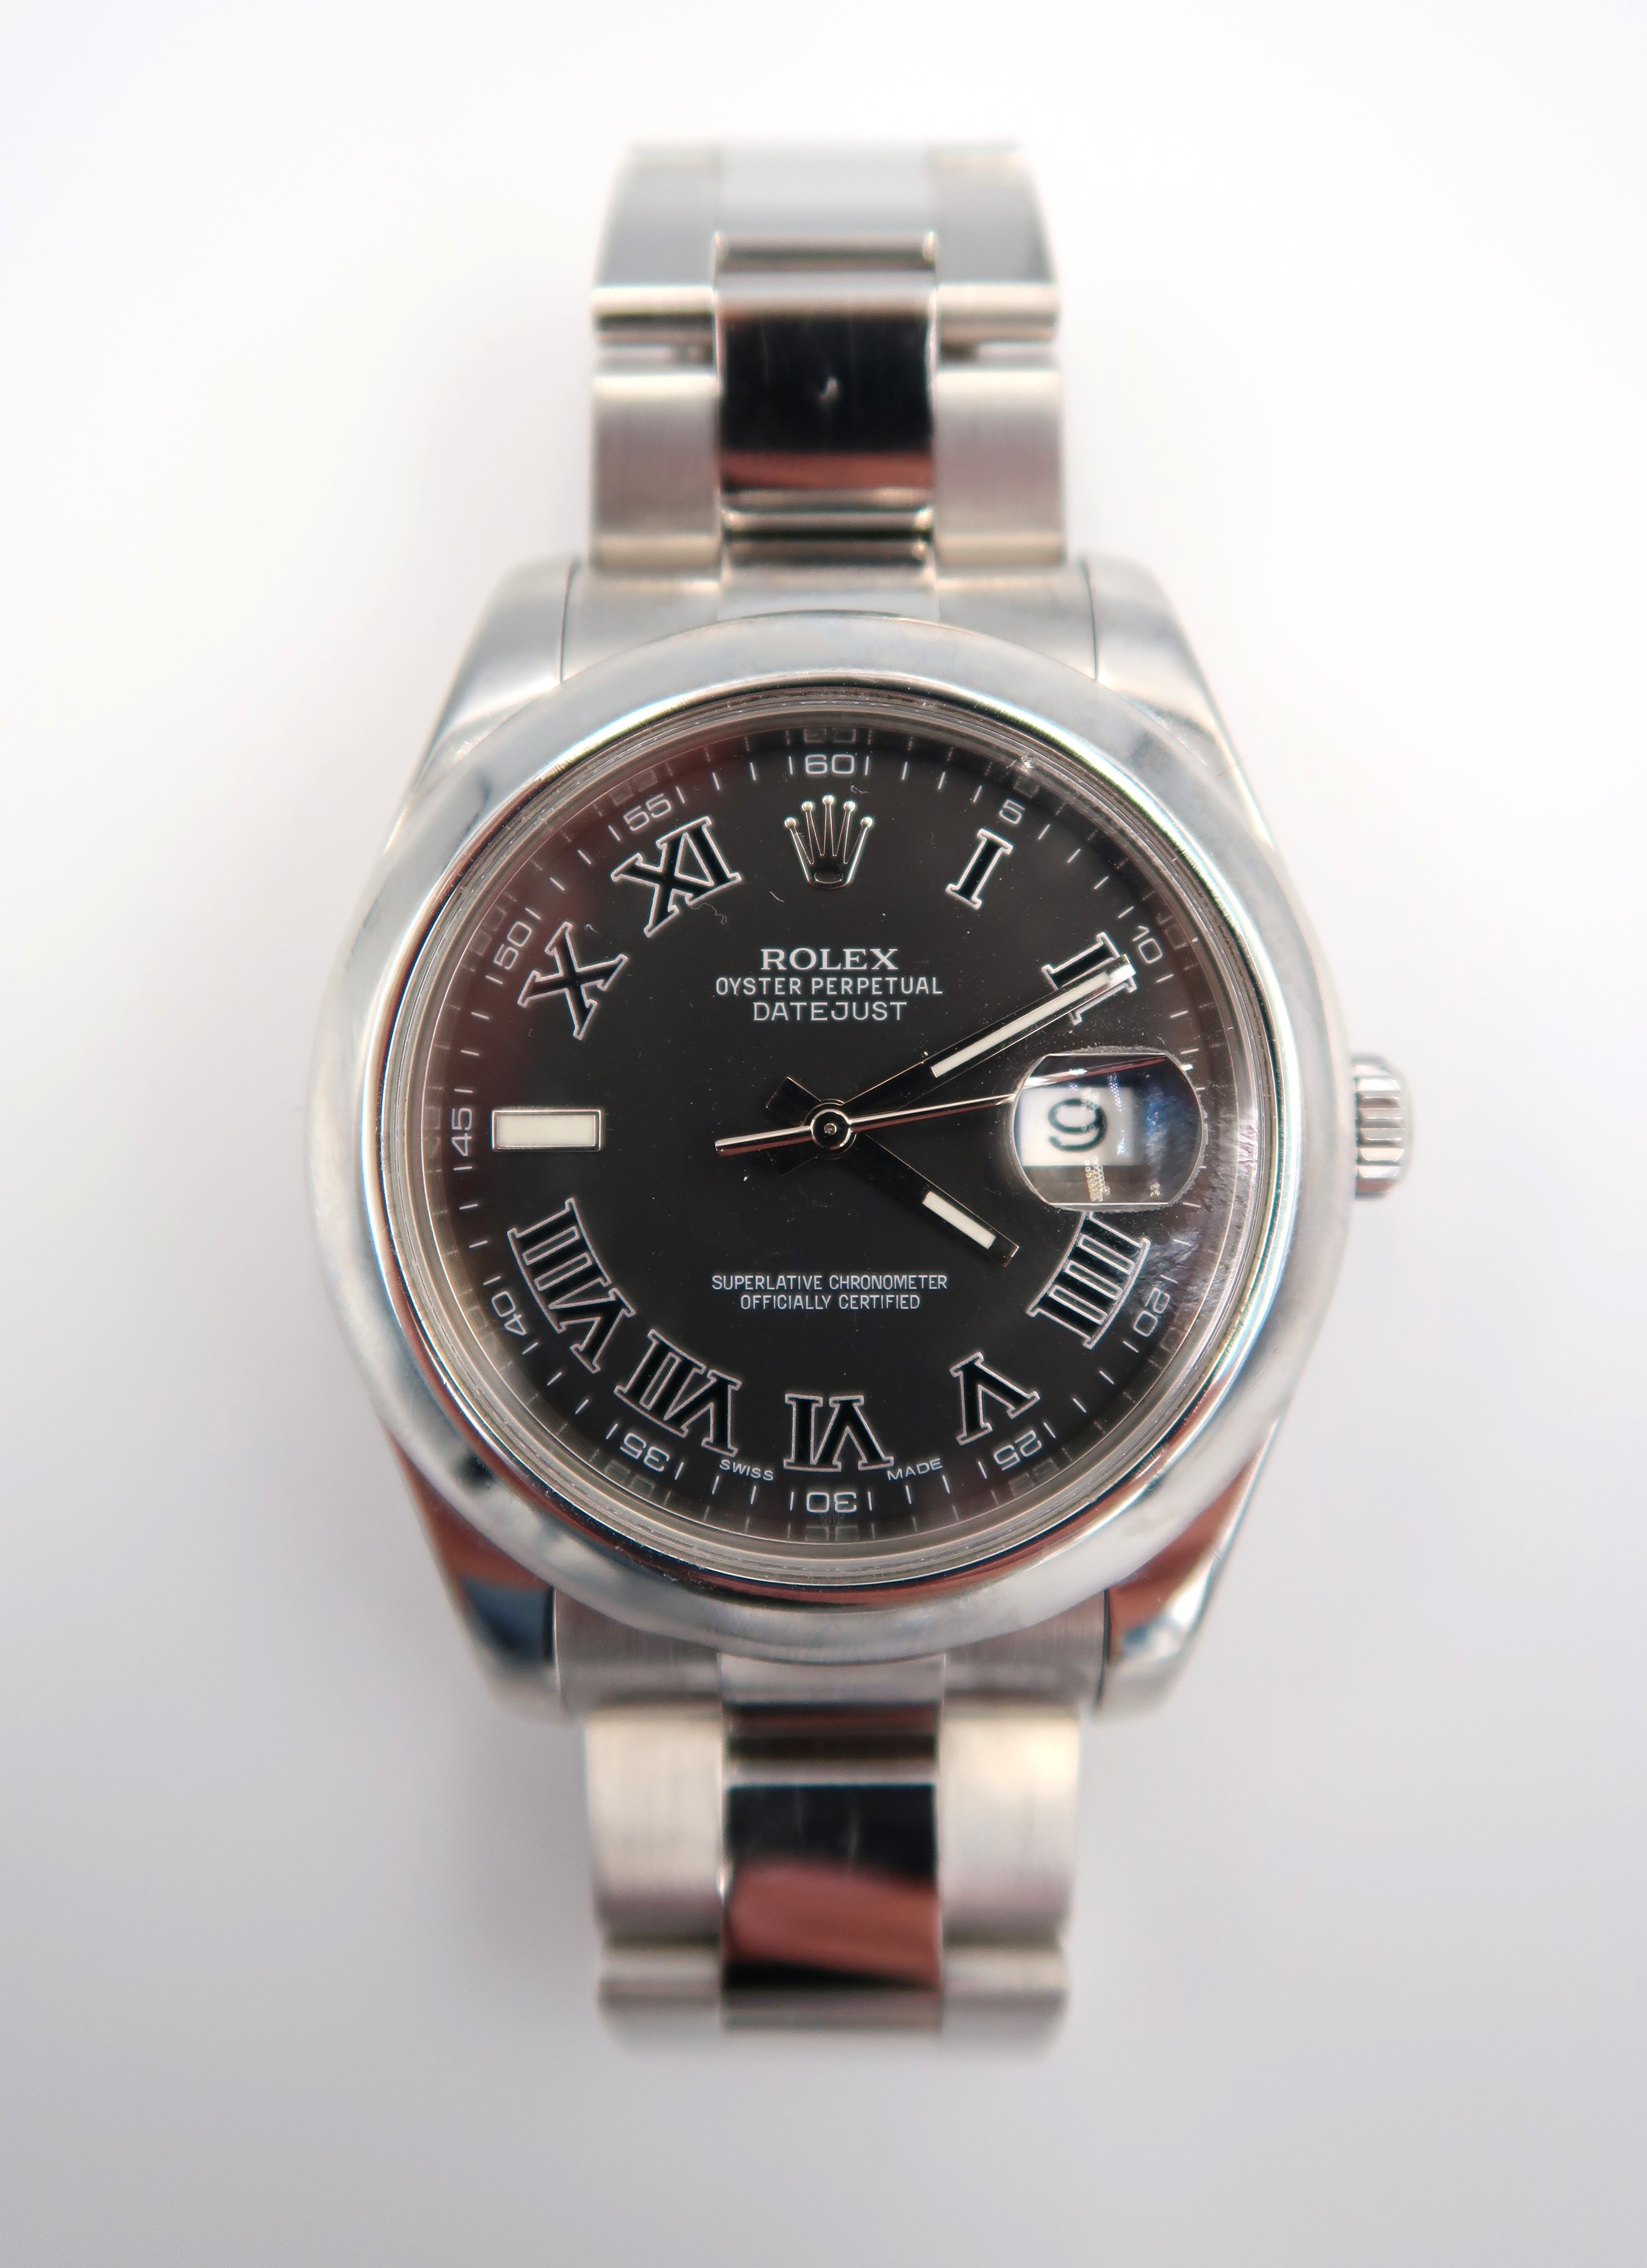 A Rolex Oyster Perpetual Datejust stainless steel wristwatch